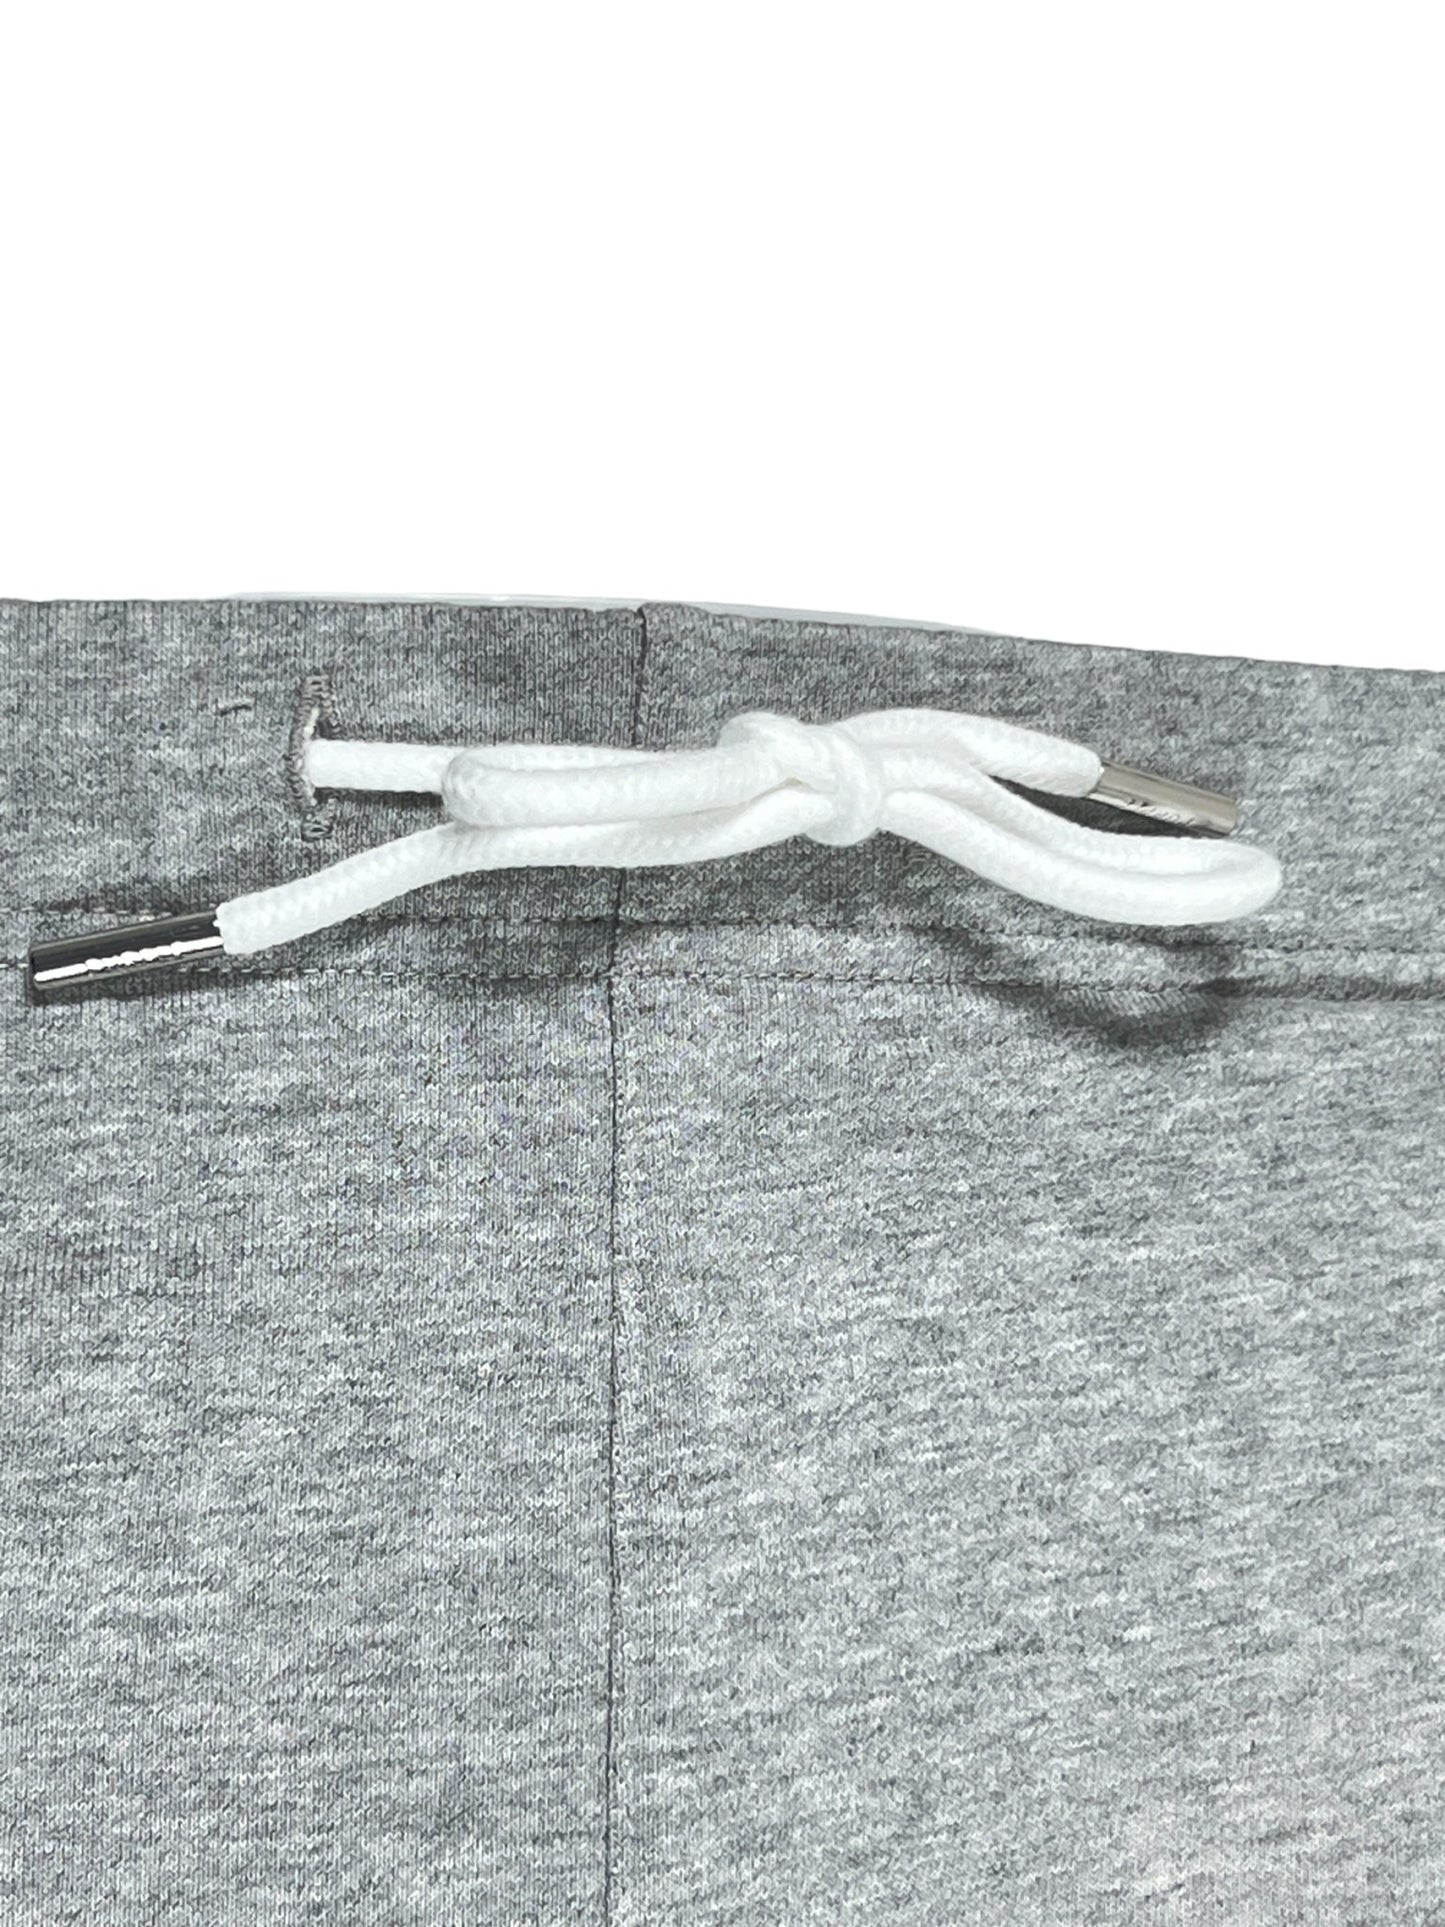 PURPLE BRAND P446-FWHG FRENCH TERRY SWEATSHORTS HEATHER white earphones tied in a knot on a gray 100% cotton sweat short fabric surface.